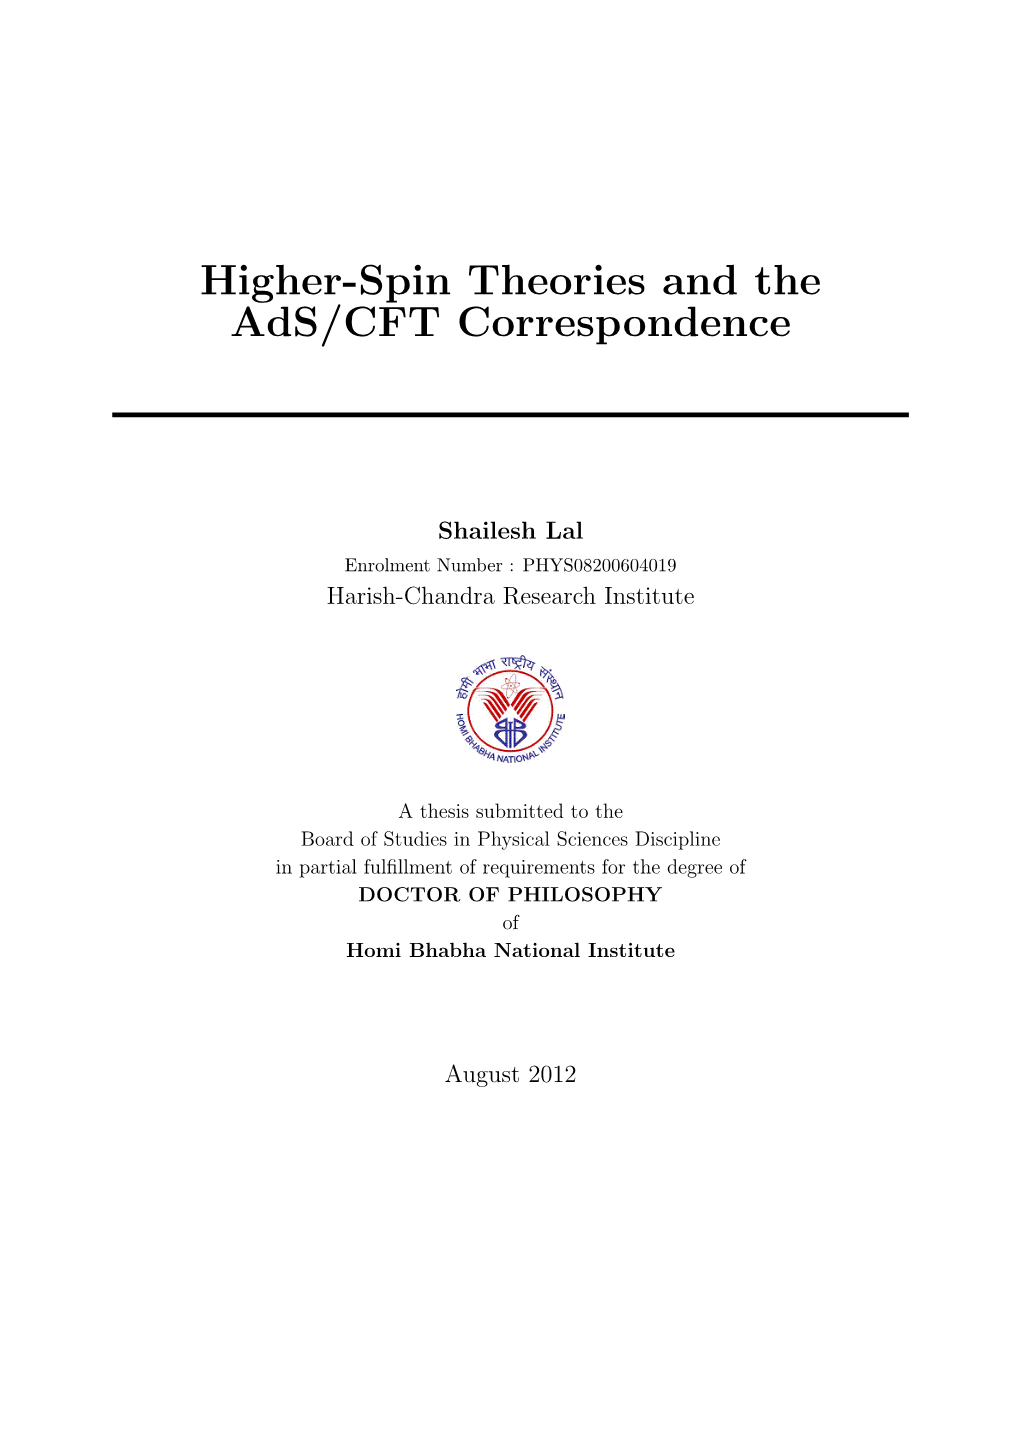 Higher-Spin Theories and the Ads/CFT Correspondence